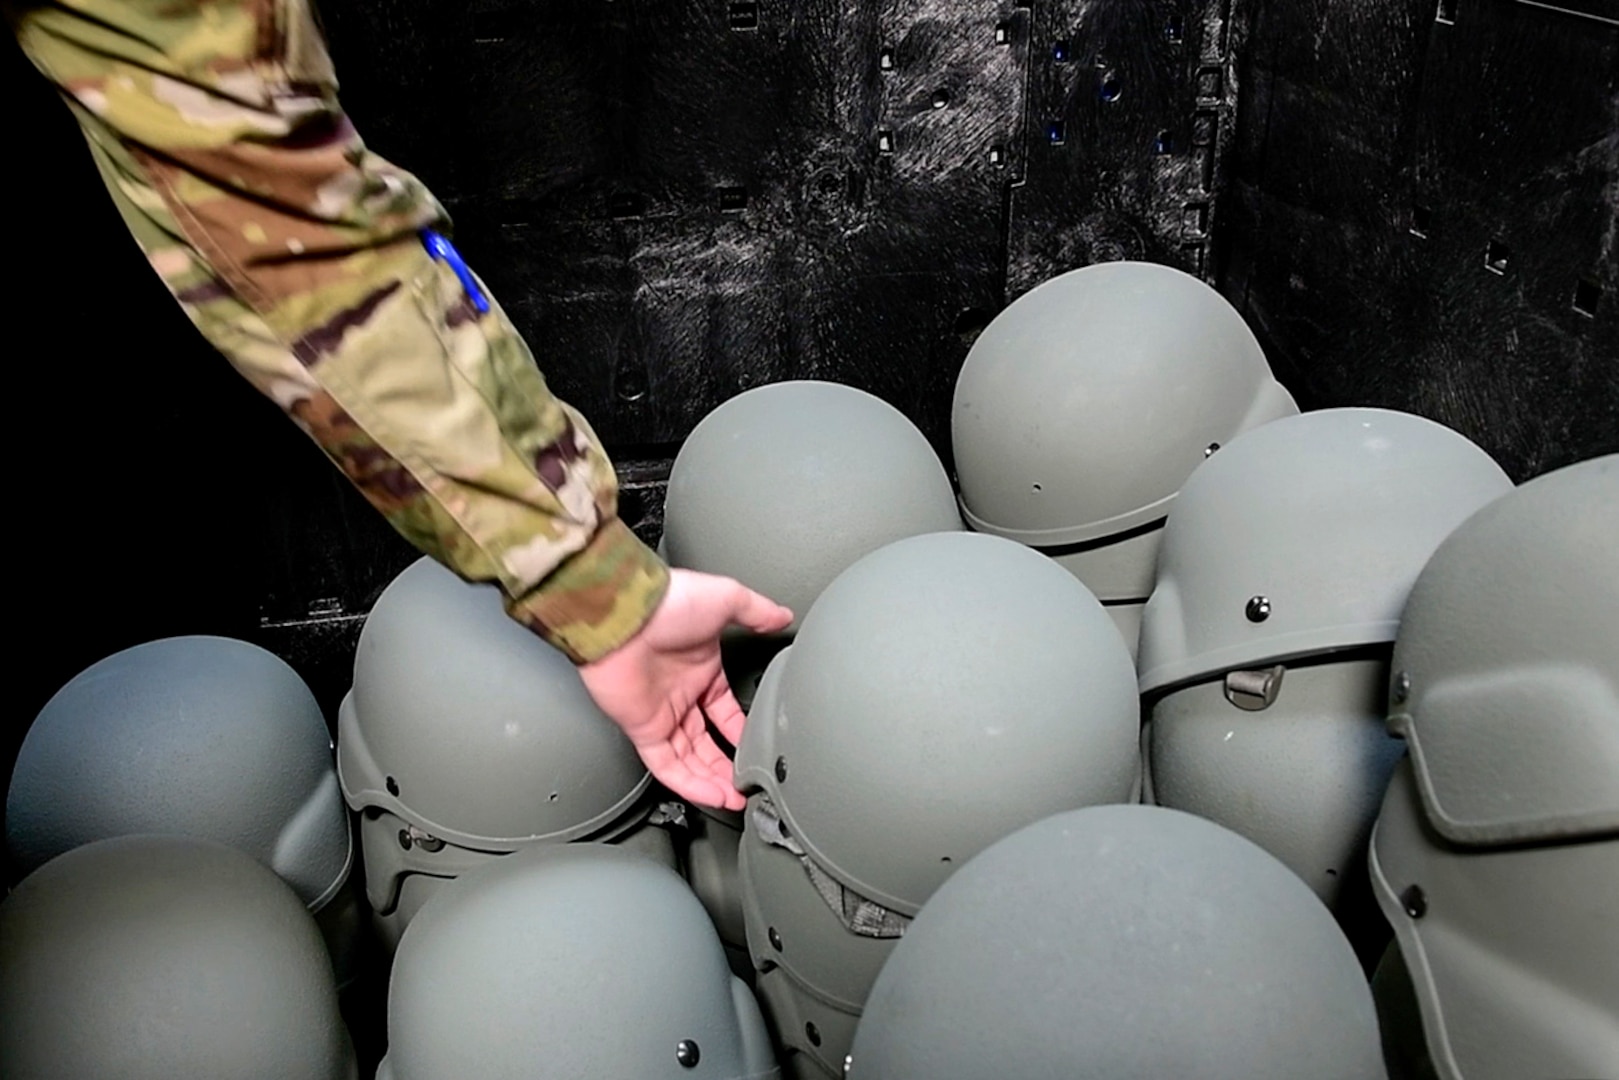 U.S. Air Force Staff Sgt. Christopher Thompson, 163d Logistics Readiness Squadron material management specialist, grabs a helmet for a service member during a deployment training exercise at March Air Reserve Base, California, Oct. 2, 2021. The training exercise, dubbed Grizzly Lightning, is phase one of a three-phase process.